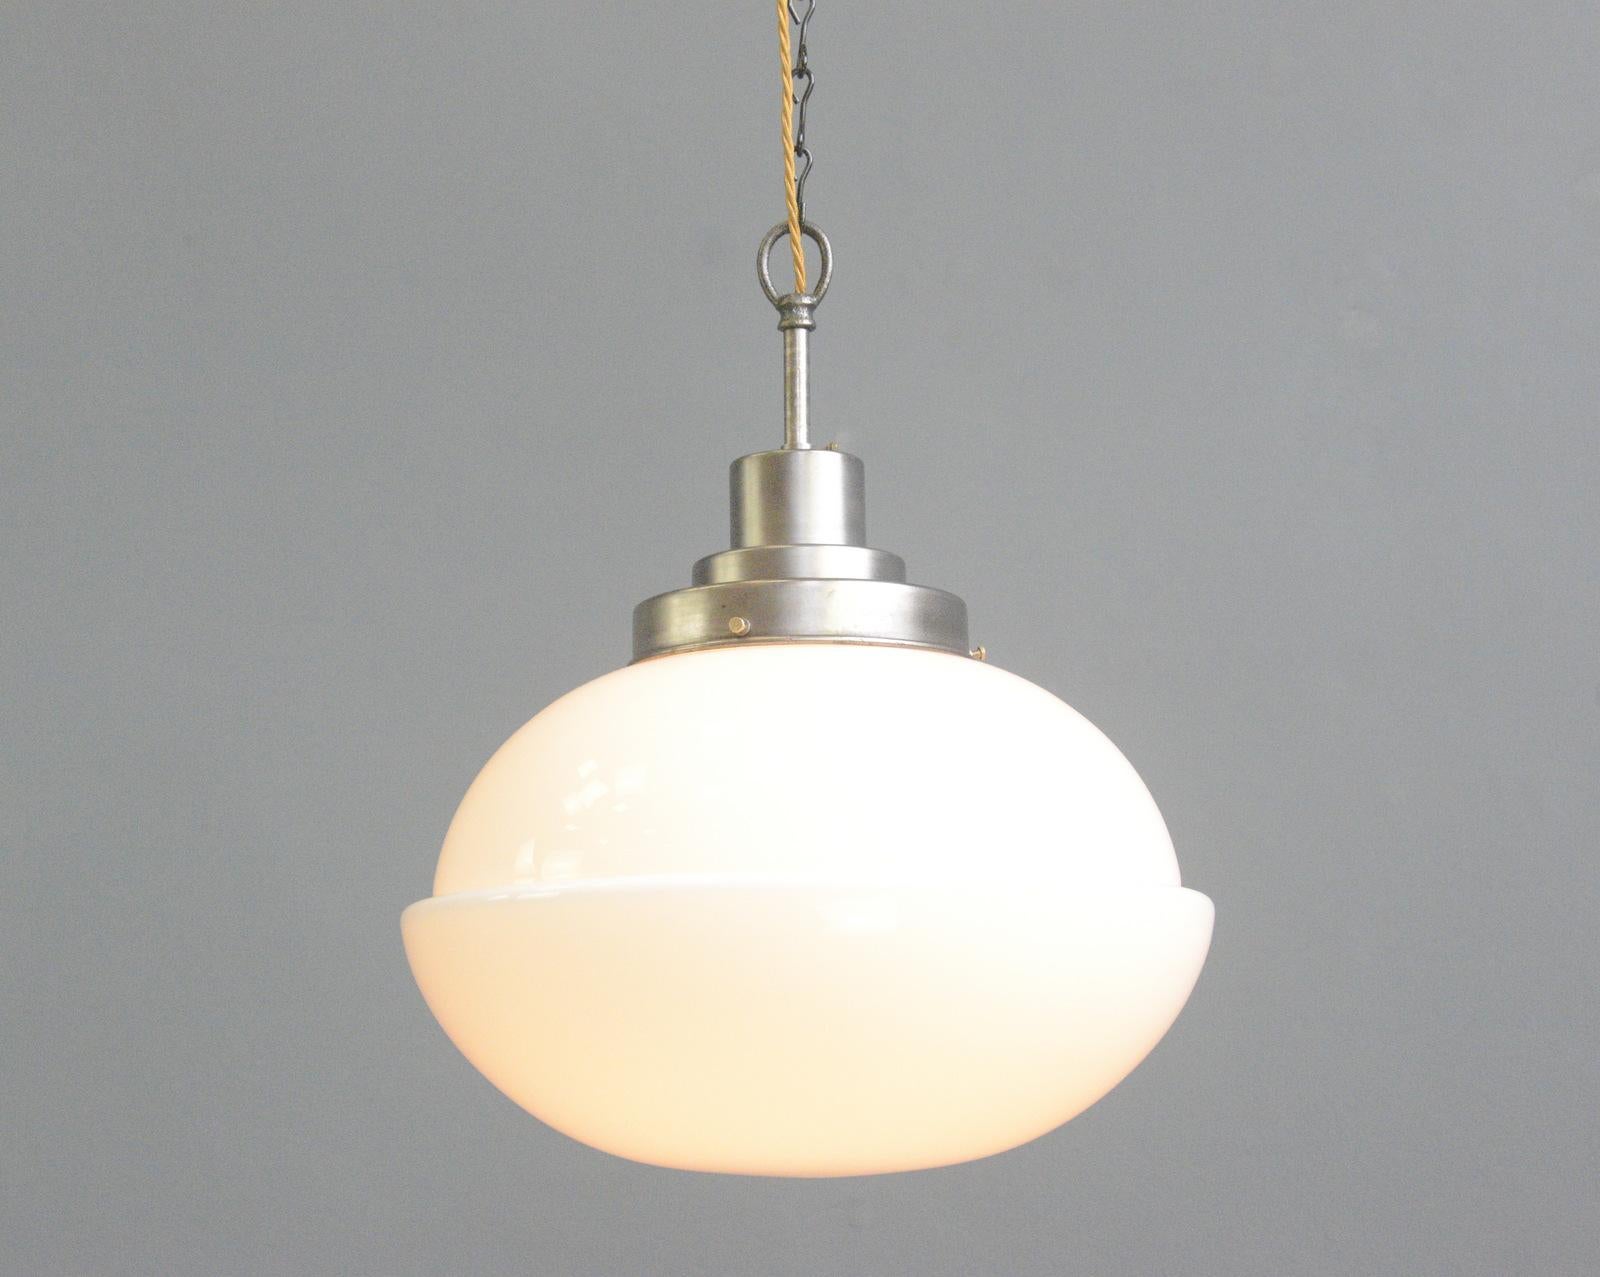 - Large single step opaline glass shade
- Steel gallery
- E27 fitting bulb holder
- Belgian ~ 1930s
- 40cm wide x 44cm tall

Condition report

Fully re wired with modern electrical components, some patina to the gallery but no damage to the